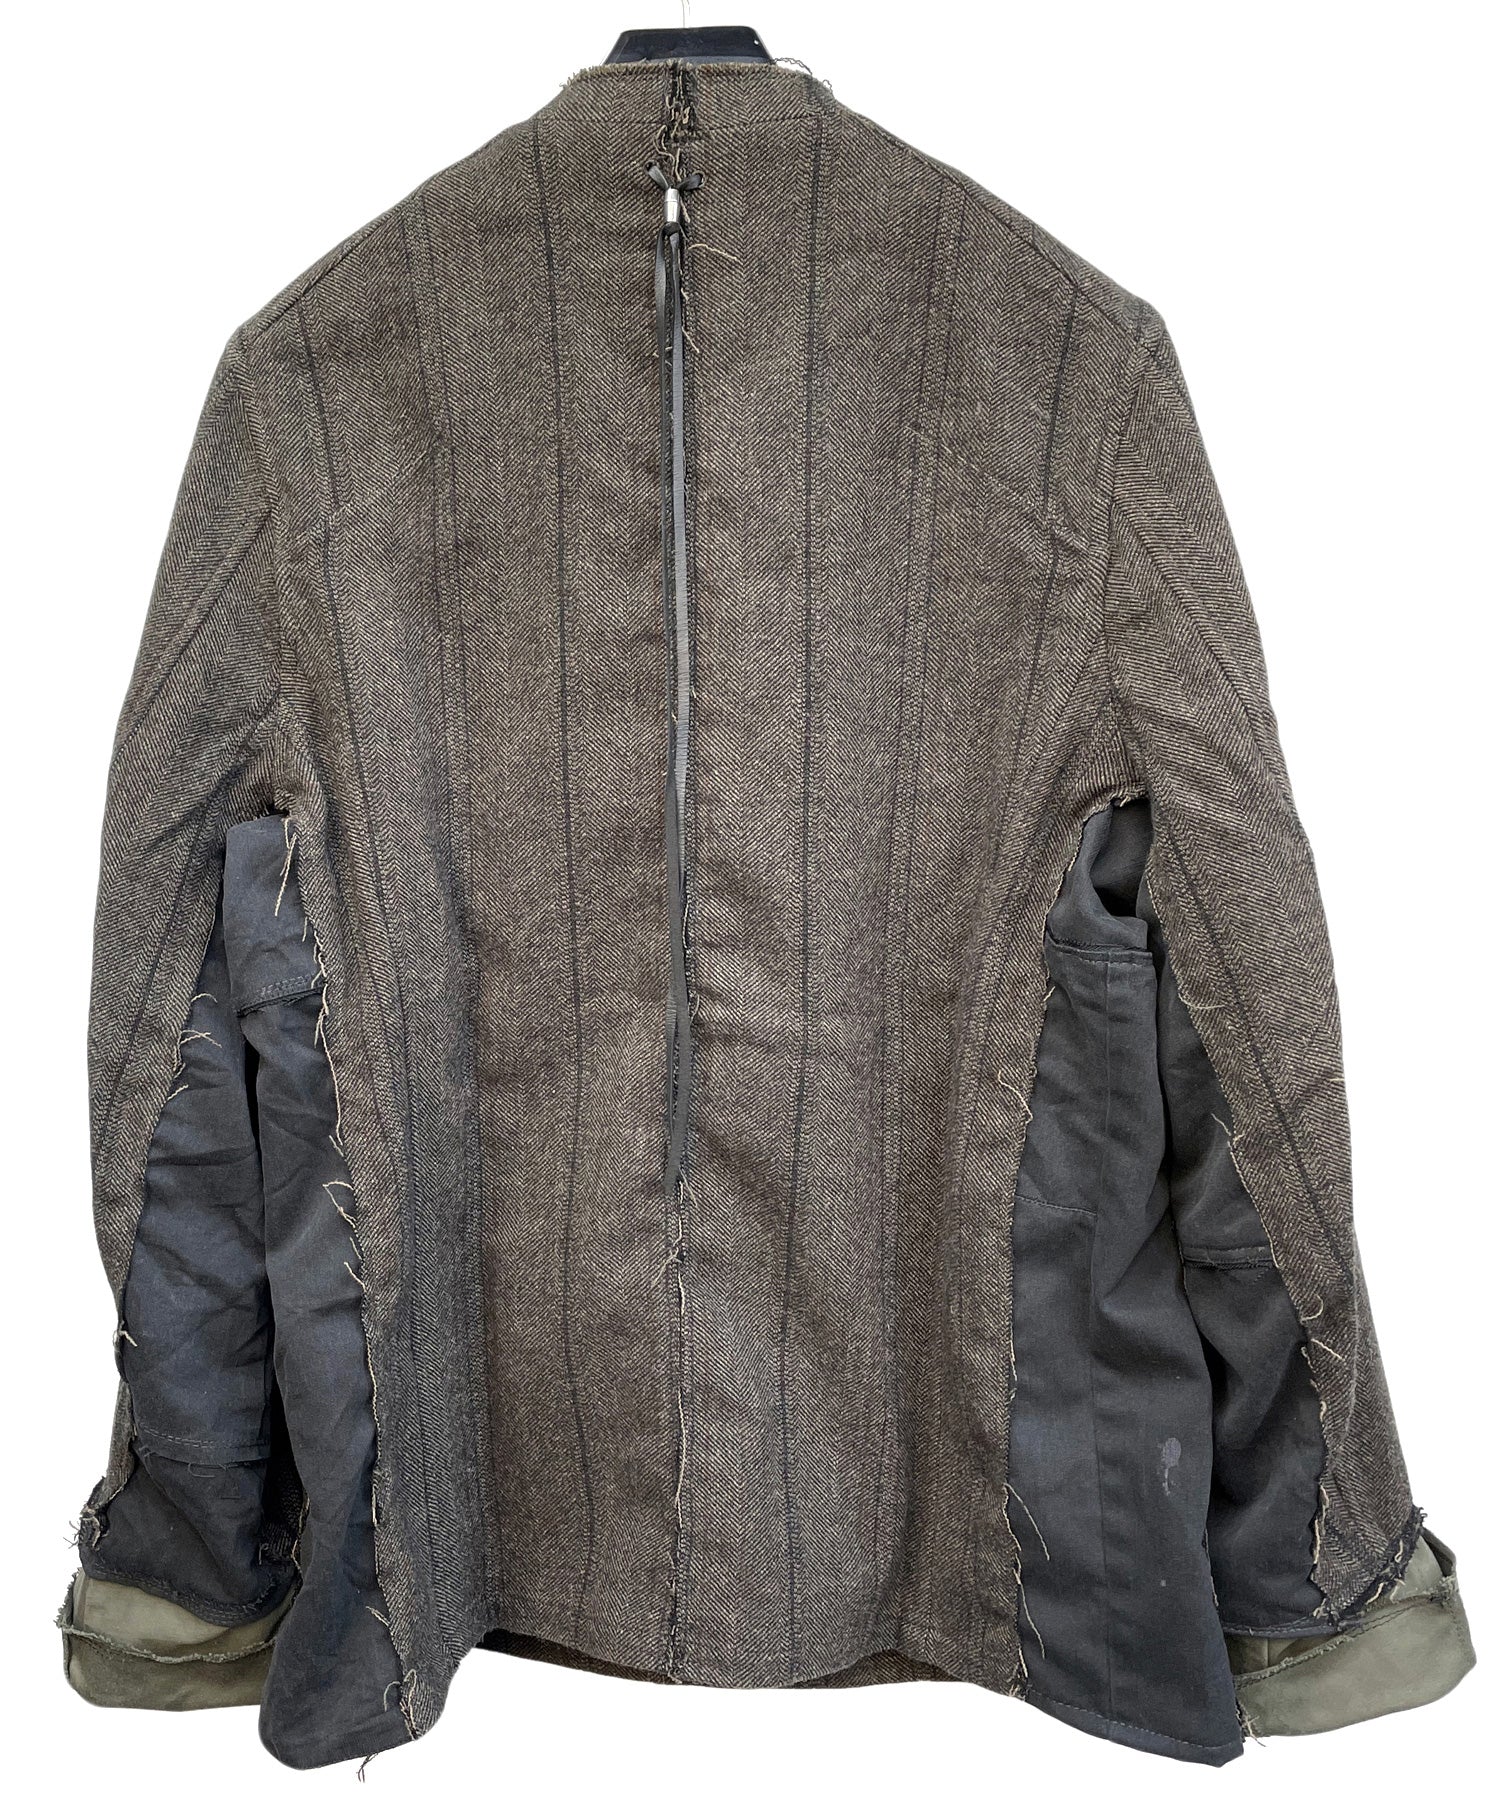 Load image into Gallery viewer, [One-of-a-kind item] Remake oversized jacket / KHAKI / L size equivalent